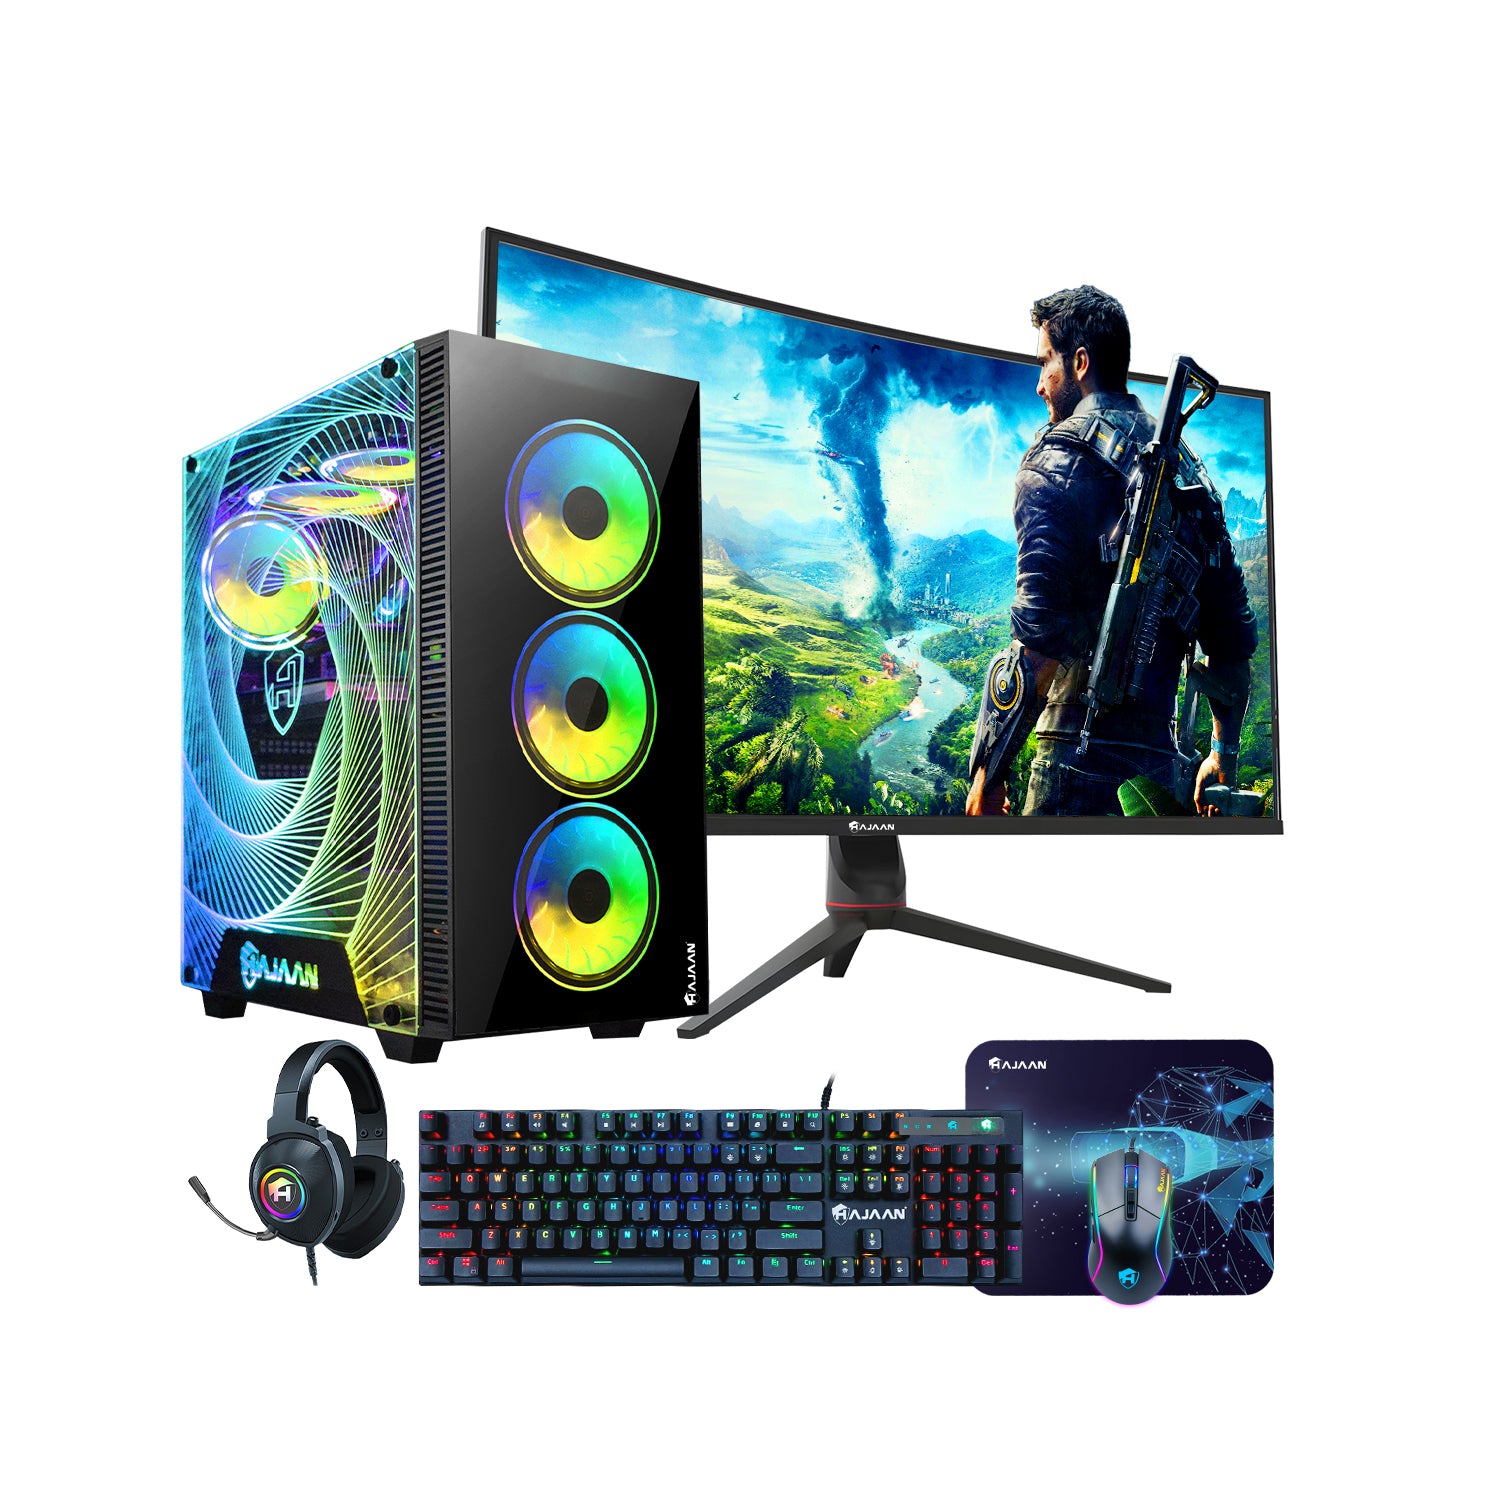 HAJAAN Gaming PC | 32” Inch Curved Gaming Monitor | Intel Core i7 Proc